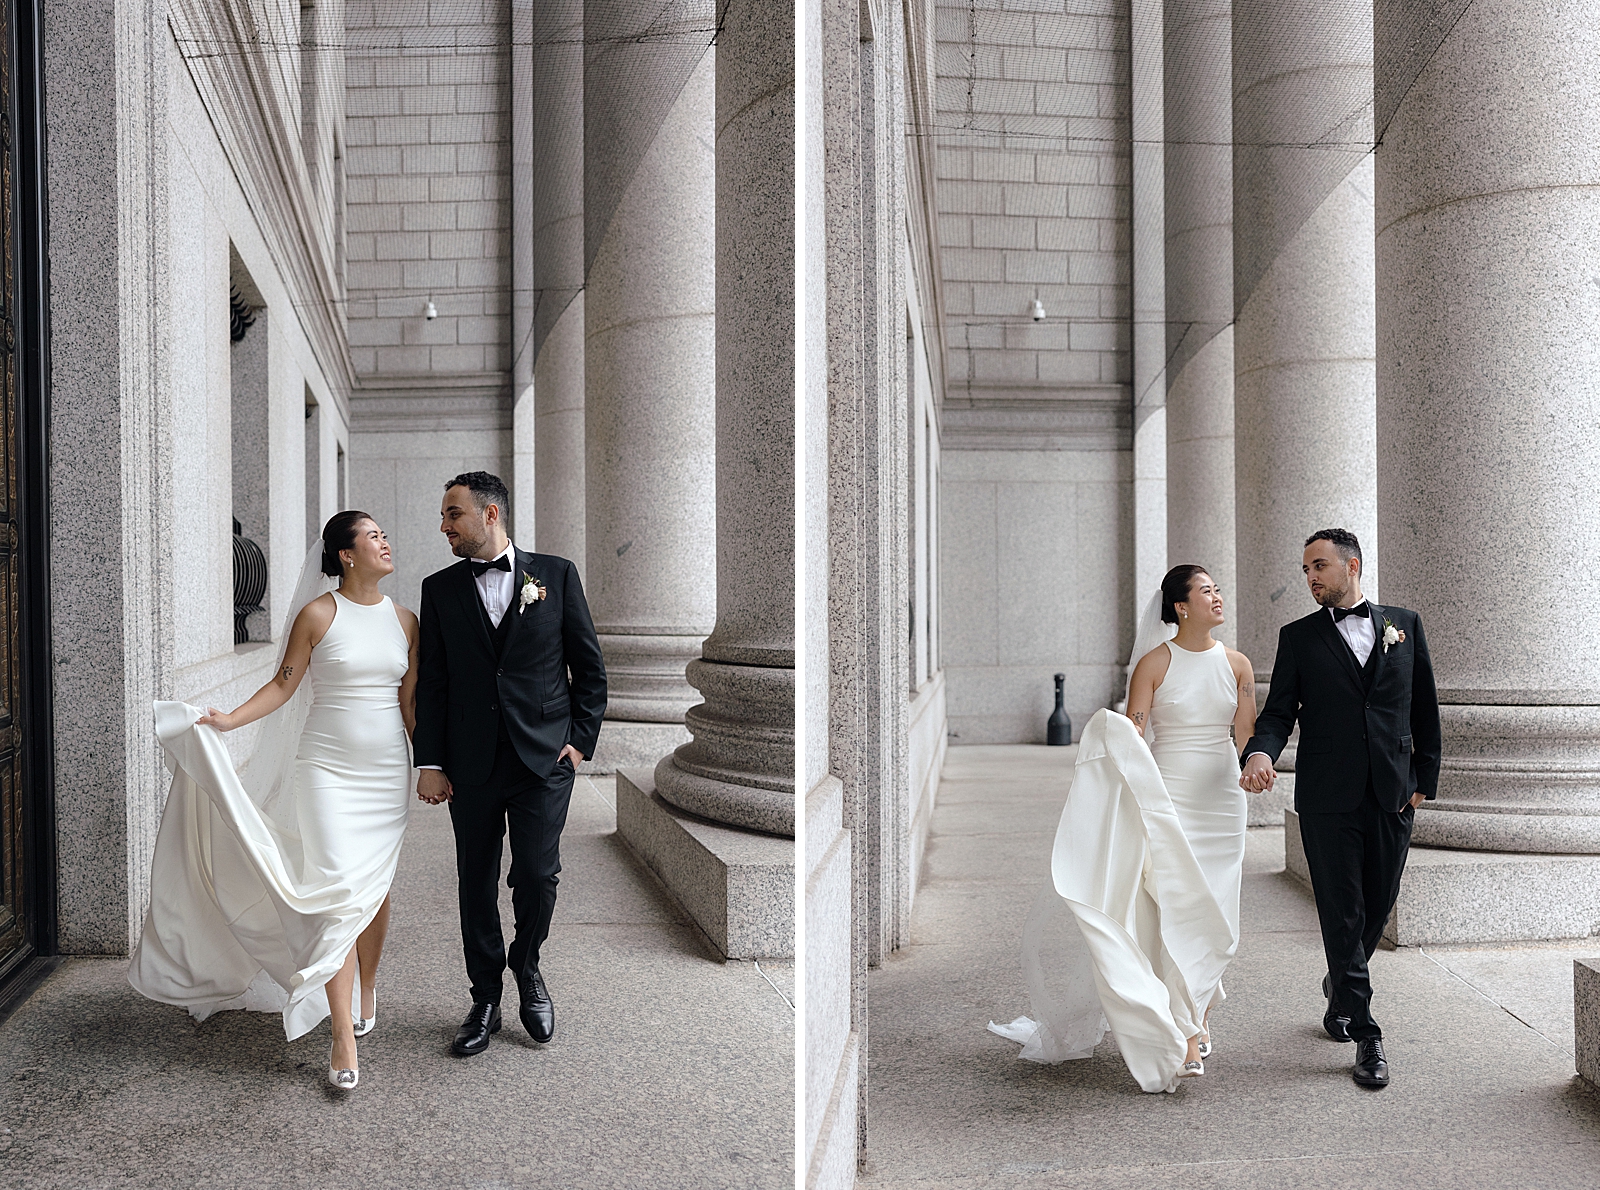 Left photo: Full body shot of the bride and groom smiling at each other as they walk hand in hand. 
Right photo: Full body shot of the bride and groom smiling at each other as they walk hand in hand. 